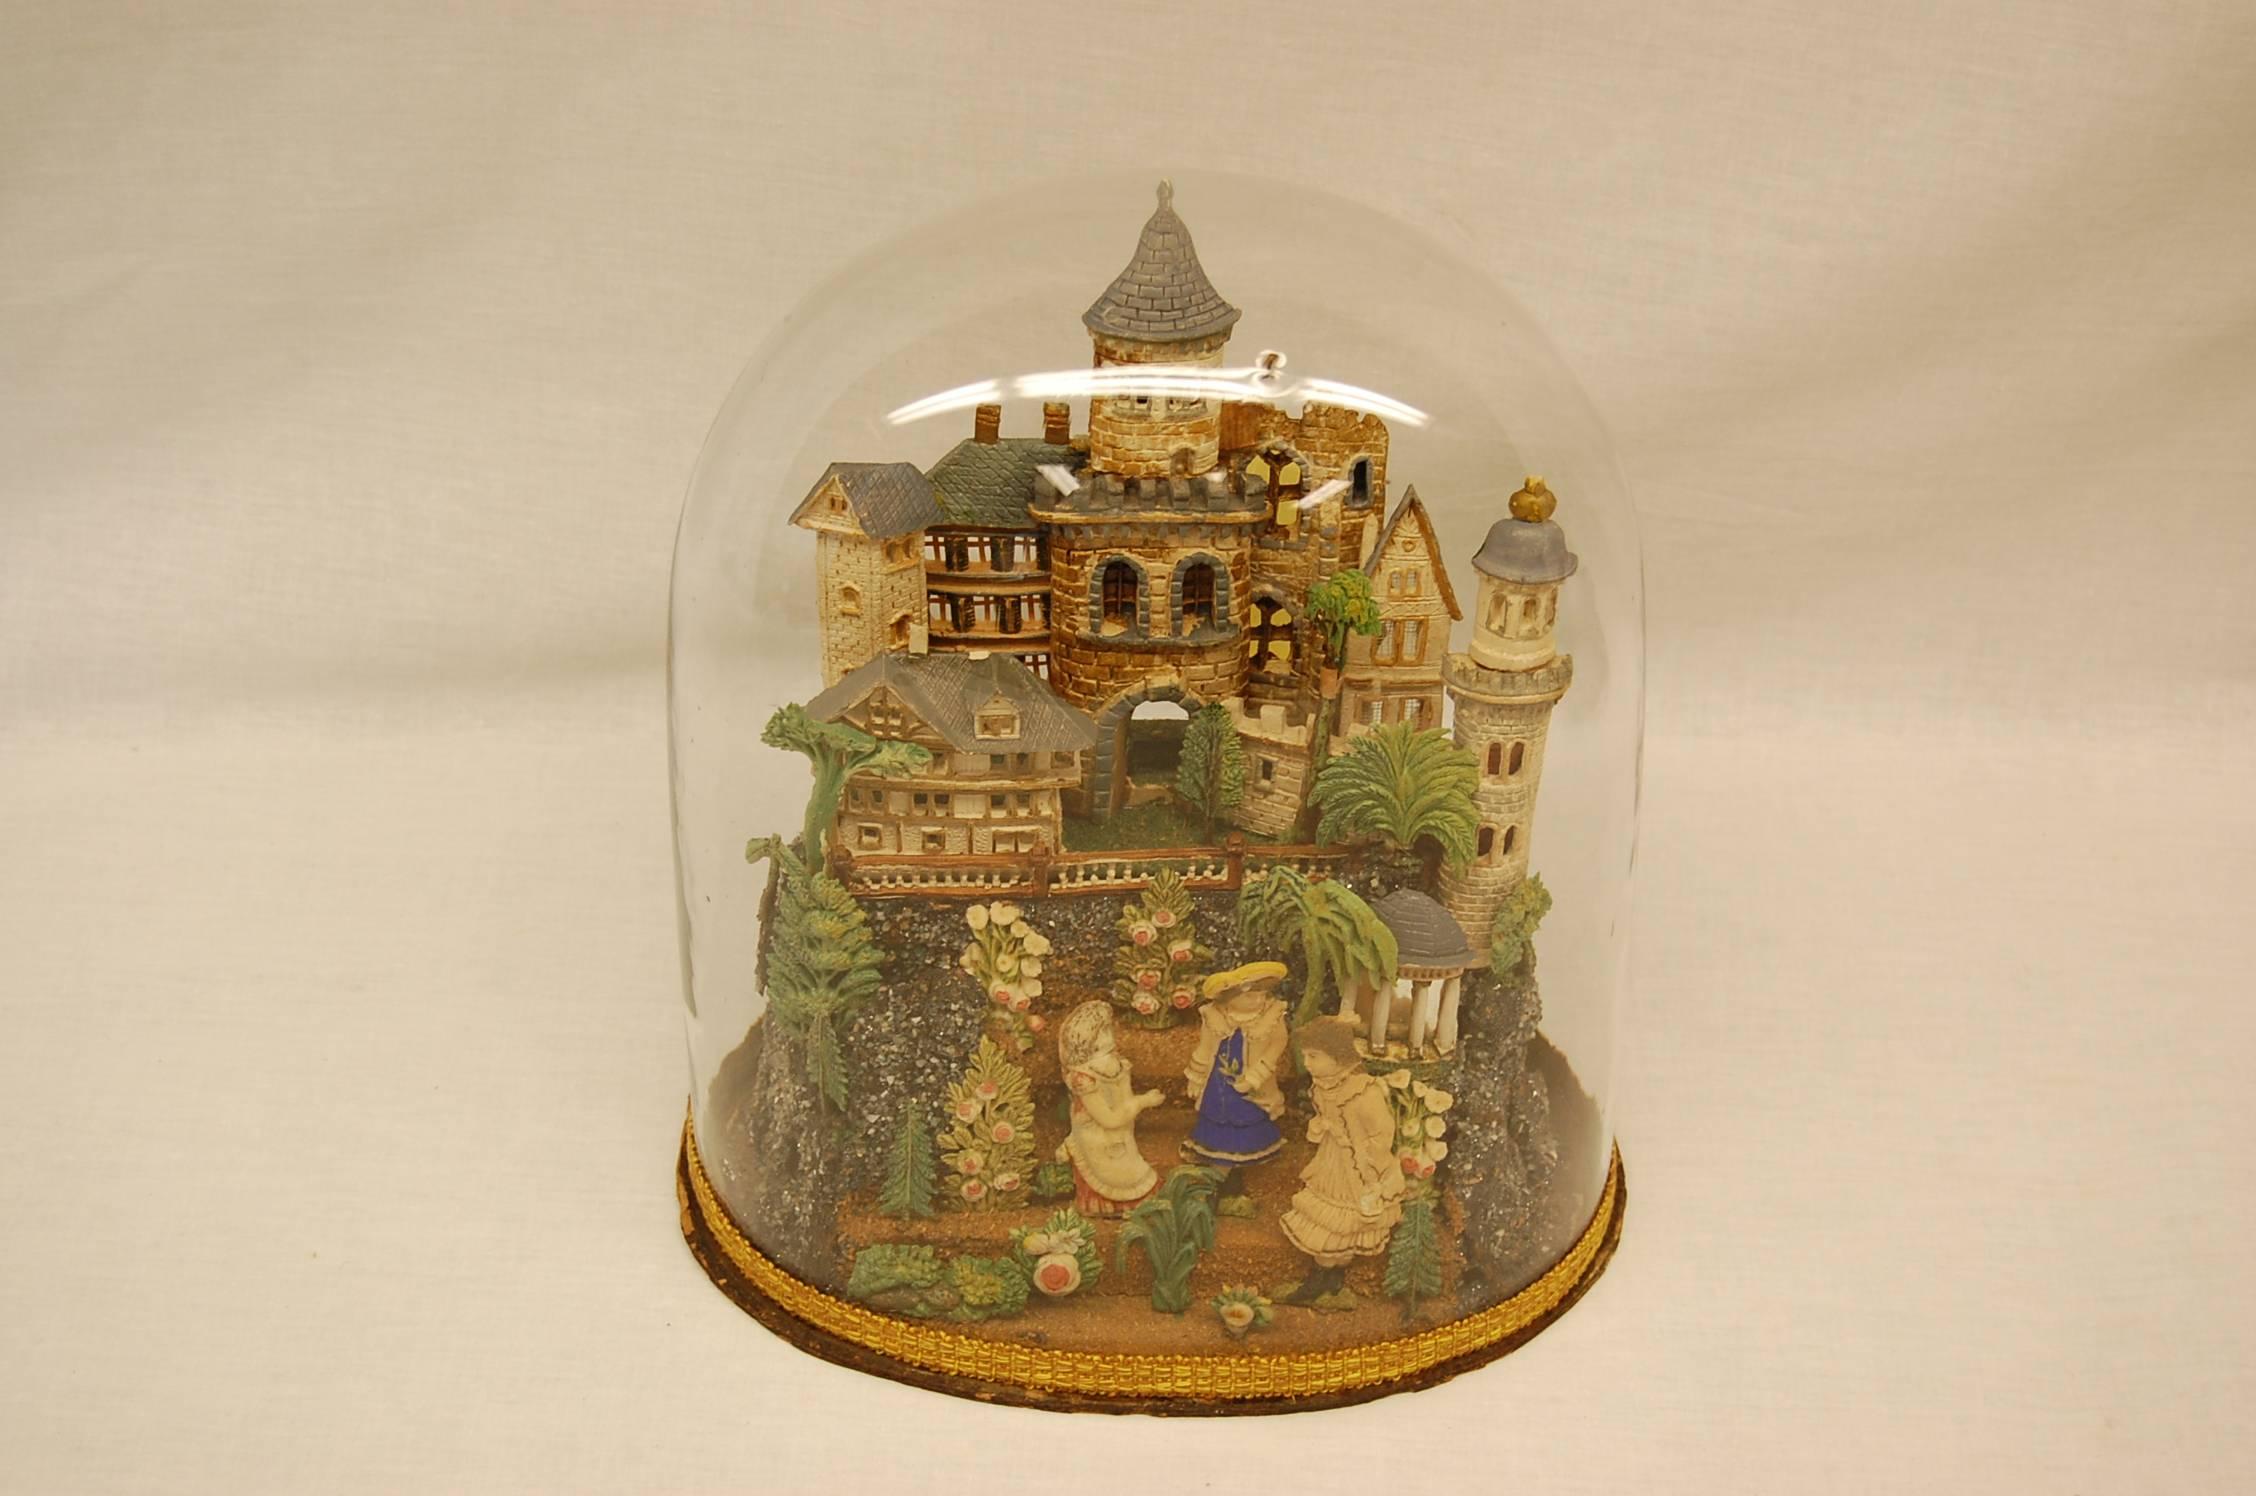 European castle, trees, bushes, people and crushed glass comprise this wonderful diorama under the original glass dome.